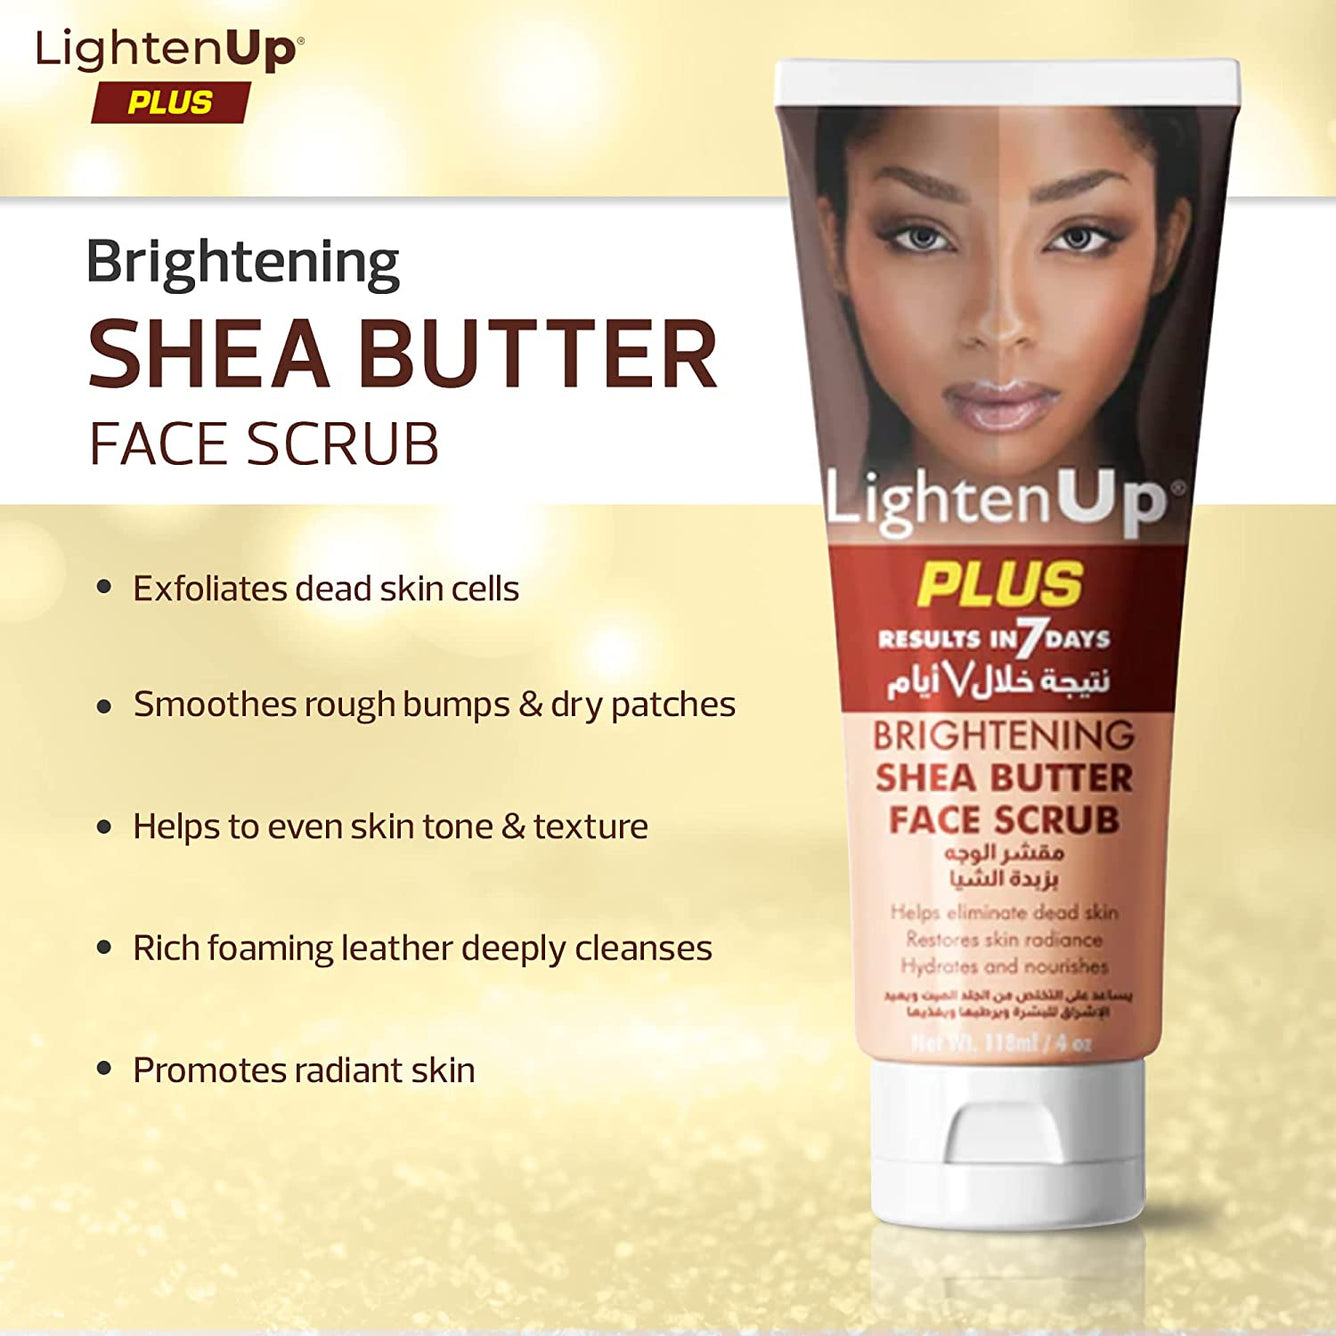 LightenUp Face Scrub 4 oz Mitchell Brands - Mitchell Brands - Skin Lightening, Skin Brightening, Fade Dark Spots, Shea Butter, Hair Growth Products